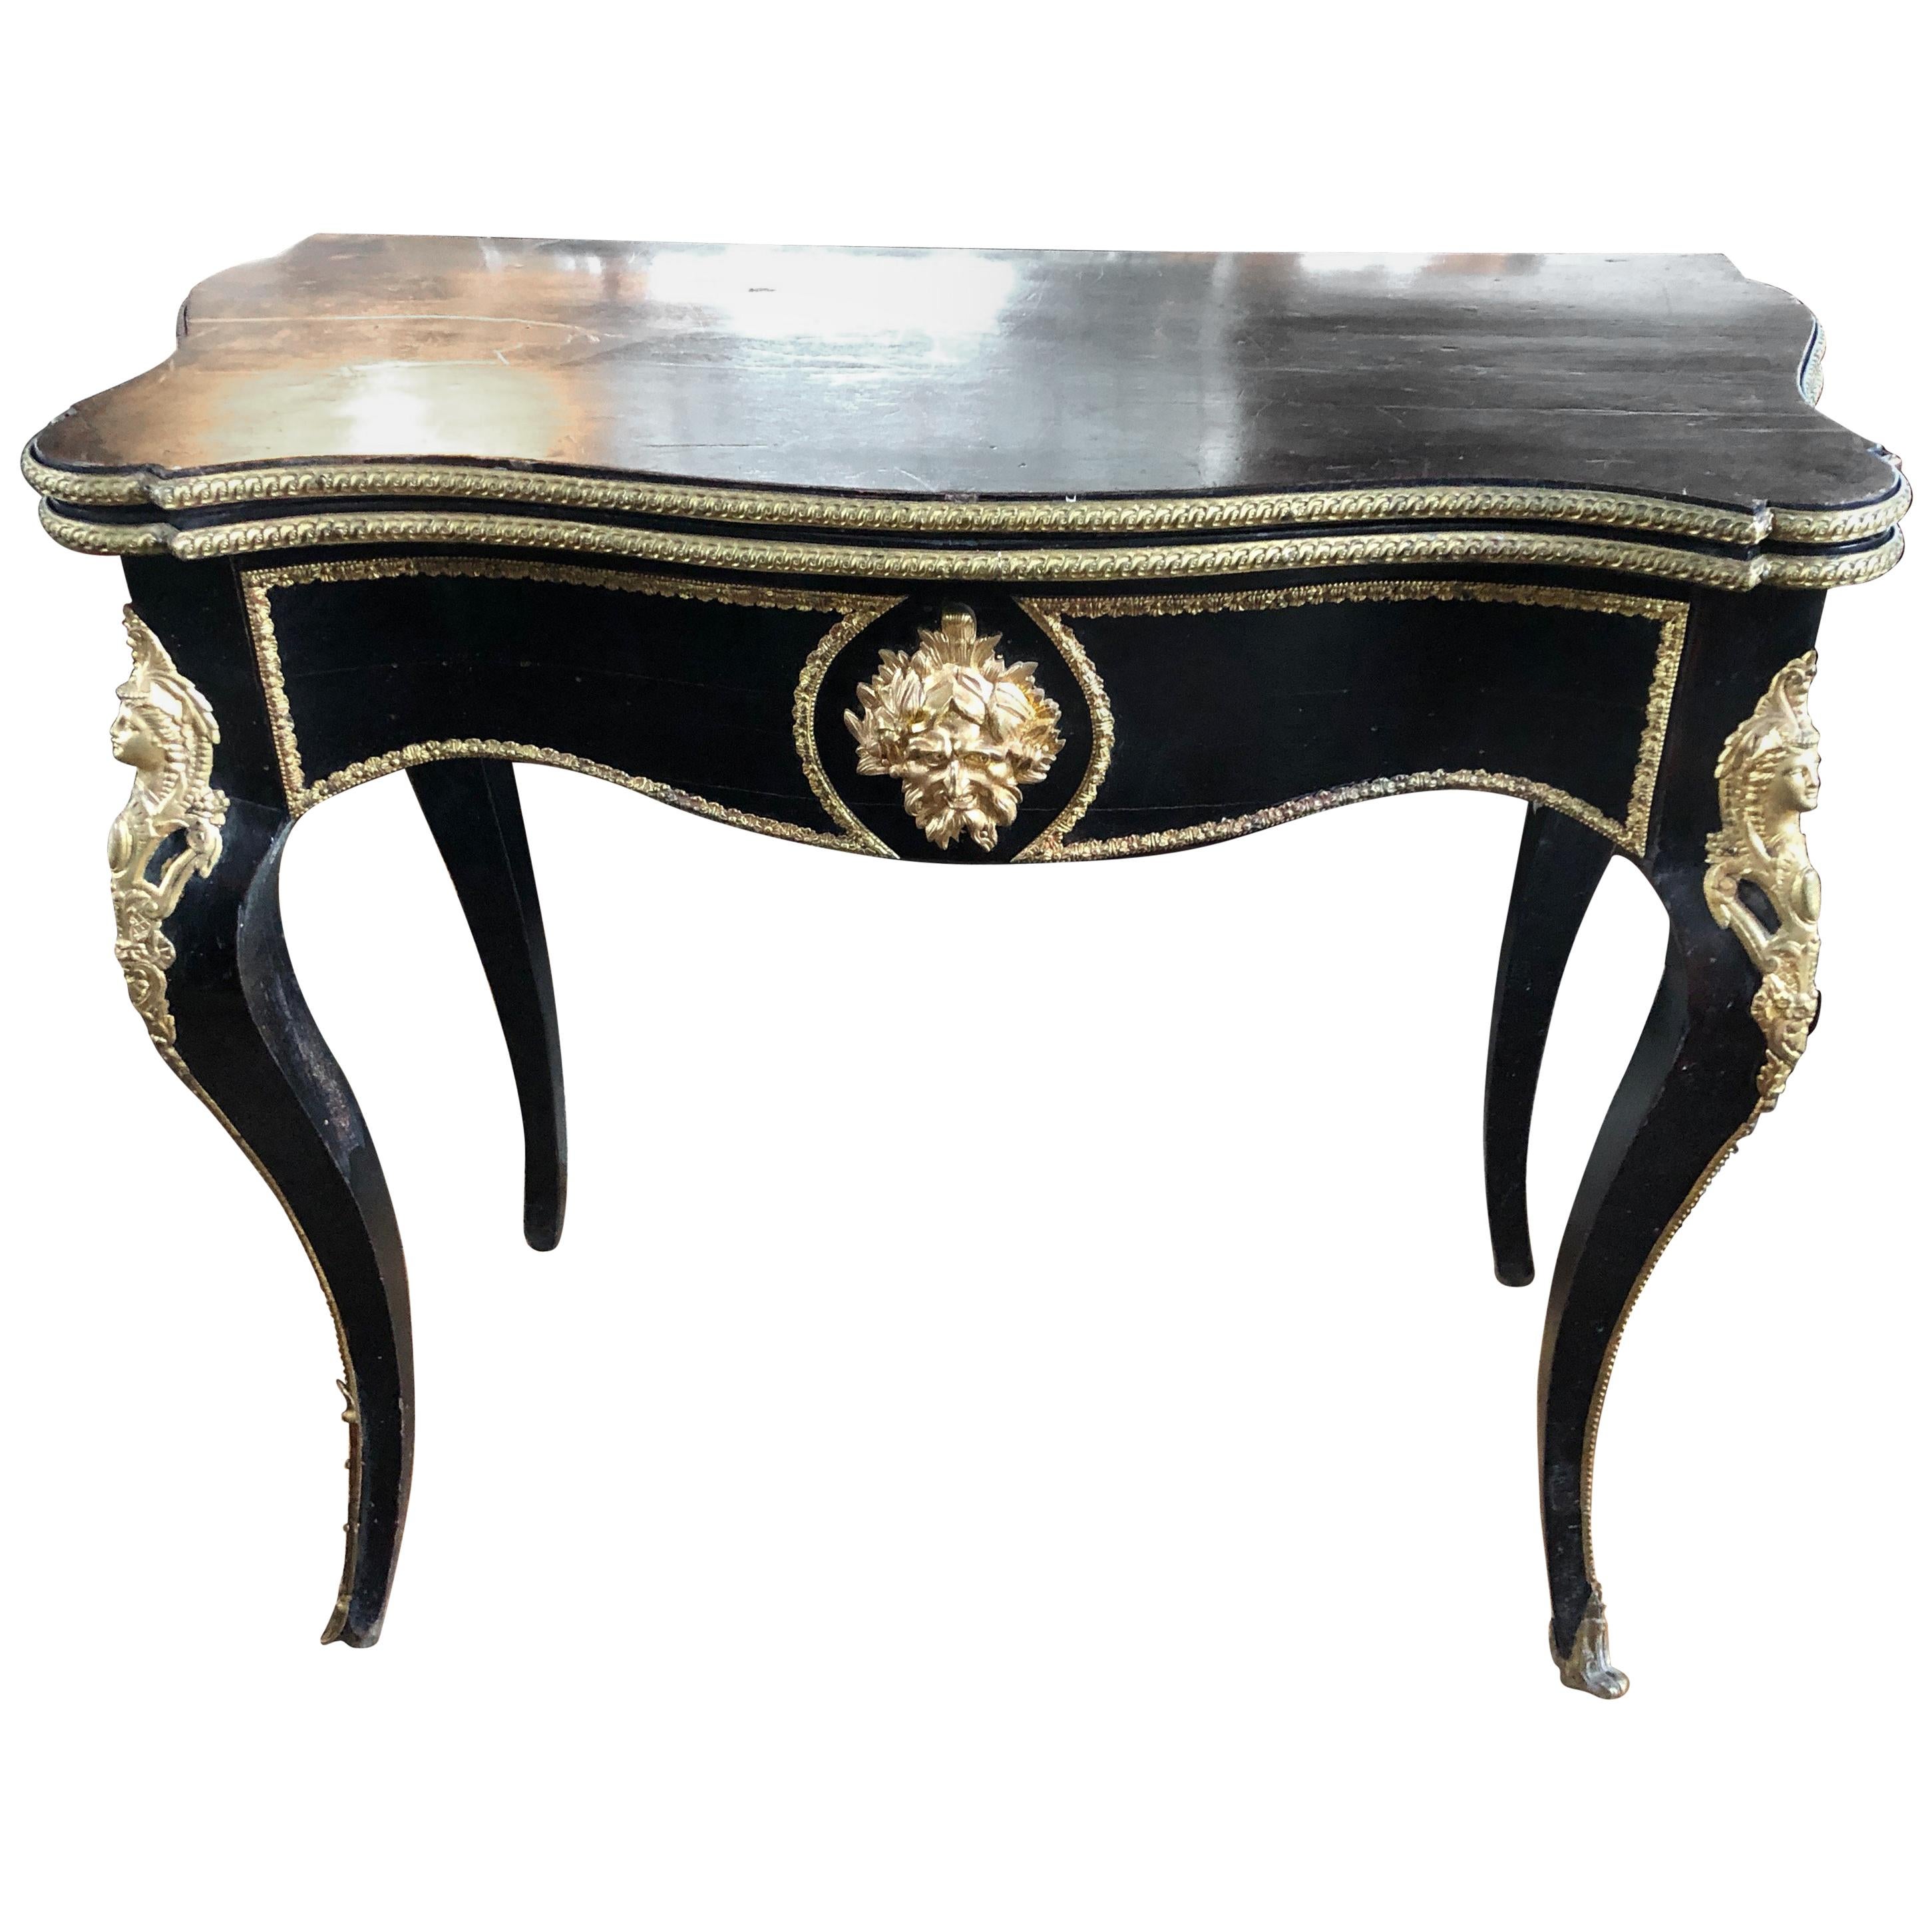 Elegant Black and Gold Louis XVI Style Console Game Table